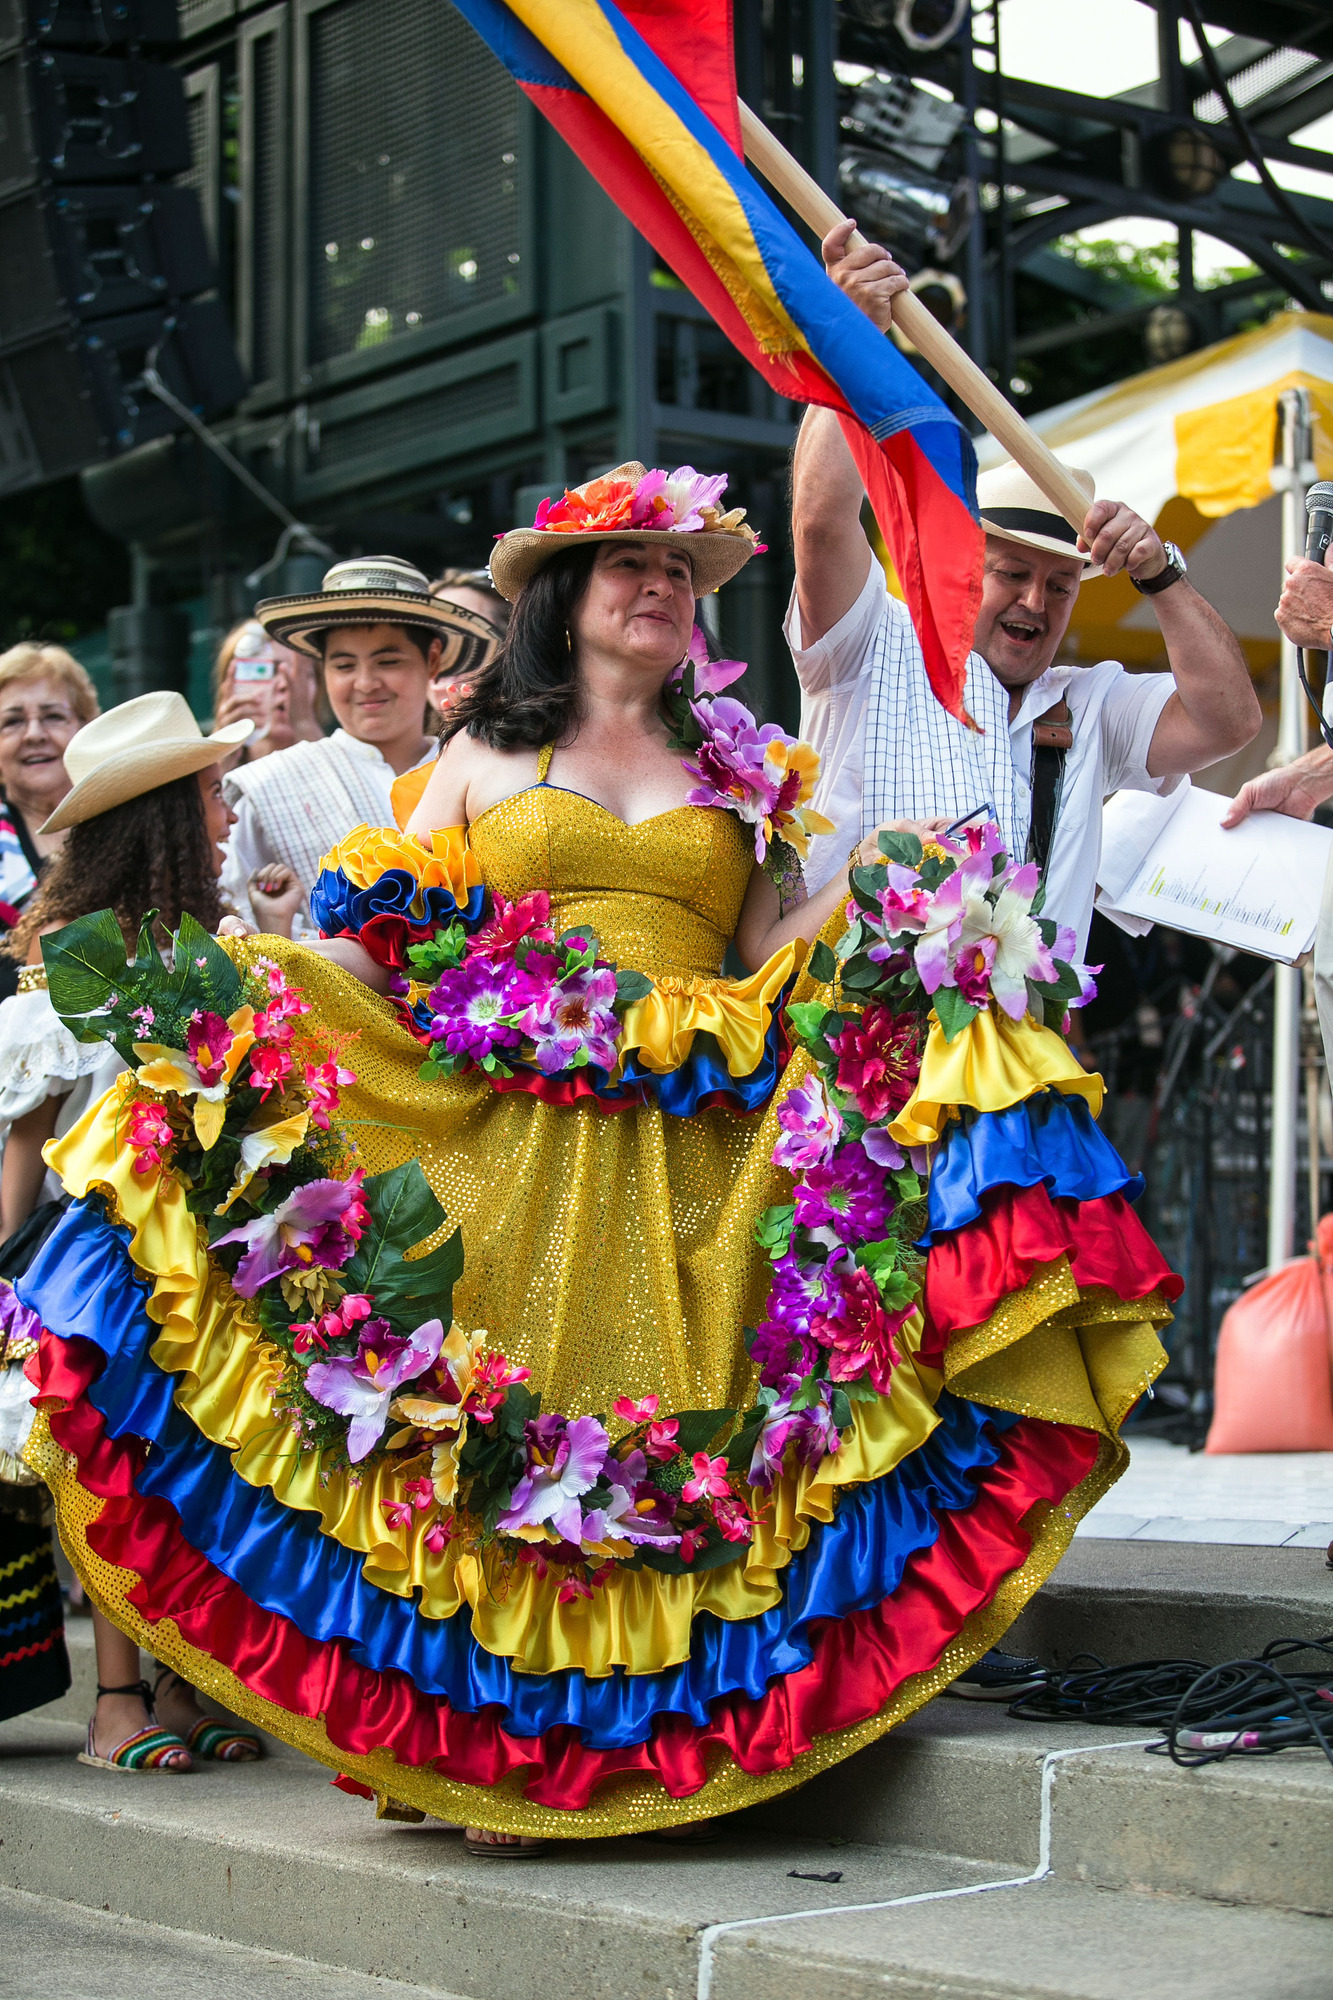 A woman has the long skirt of her golden sequin dress grasped in her hands. The dress is in the horizontal band colors of the Colombian flag: yellow, blue, and red, with a golden-yellow being the most prominent. The dress is adorned with flowers, and so is her wide brim hat. In her group is a man with a wide brim hat waving the Colombian flag.